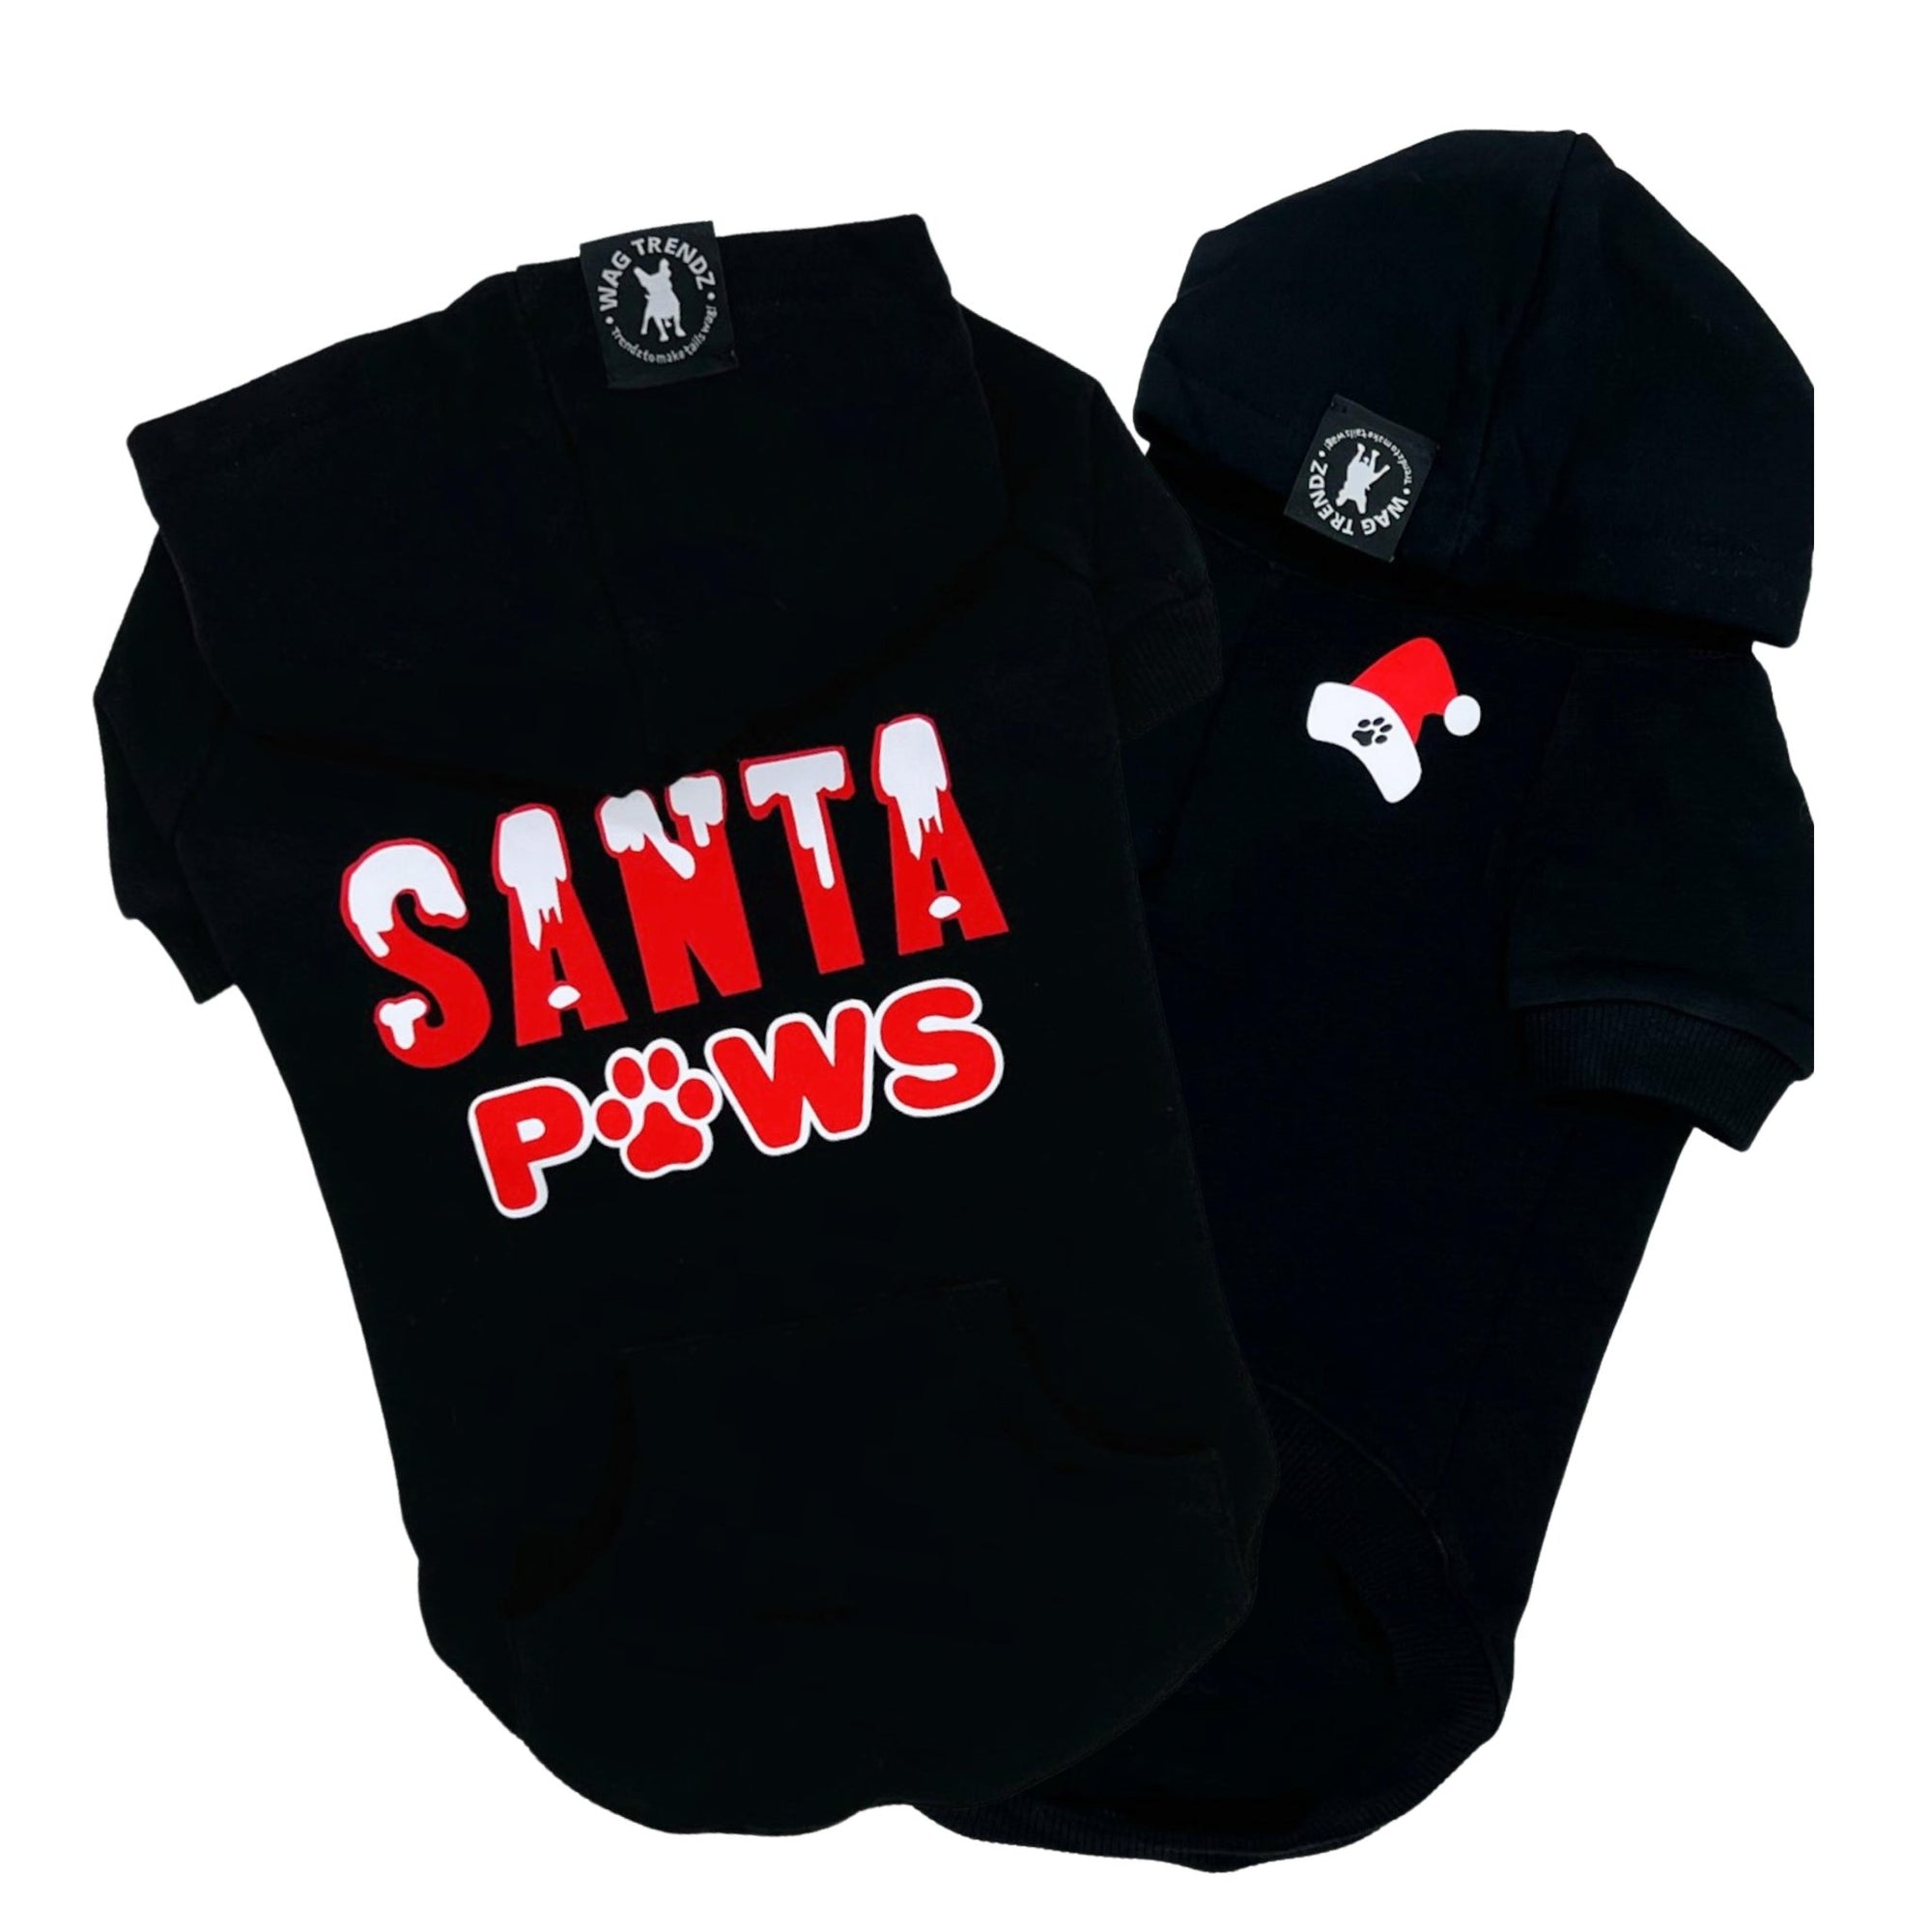 Dog Hoodie - Hoodies For Dogs - &quot;Santa Paws&quot; dog hoodie in black - back view is snow capped red and white SANTA letters with paws in red and white spelled with a paw - front view with red and white Santa hat emoji with black paw print- against solid white background - Wag Trendz